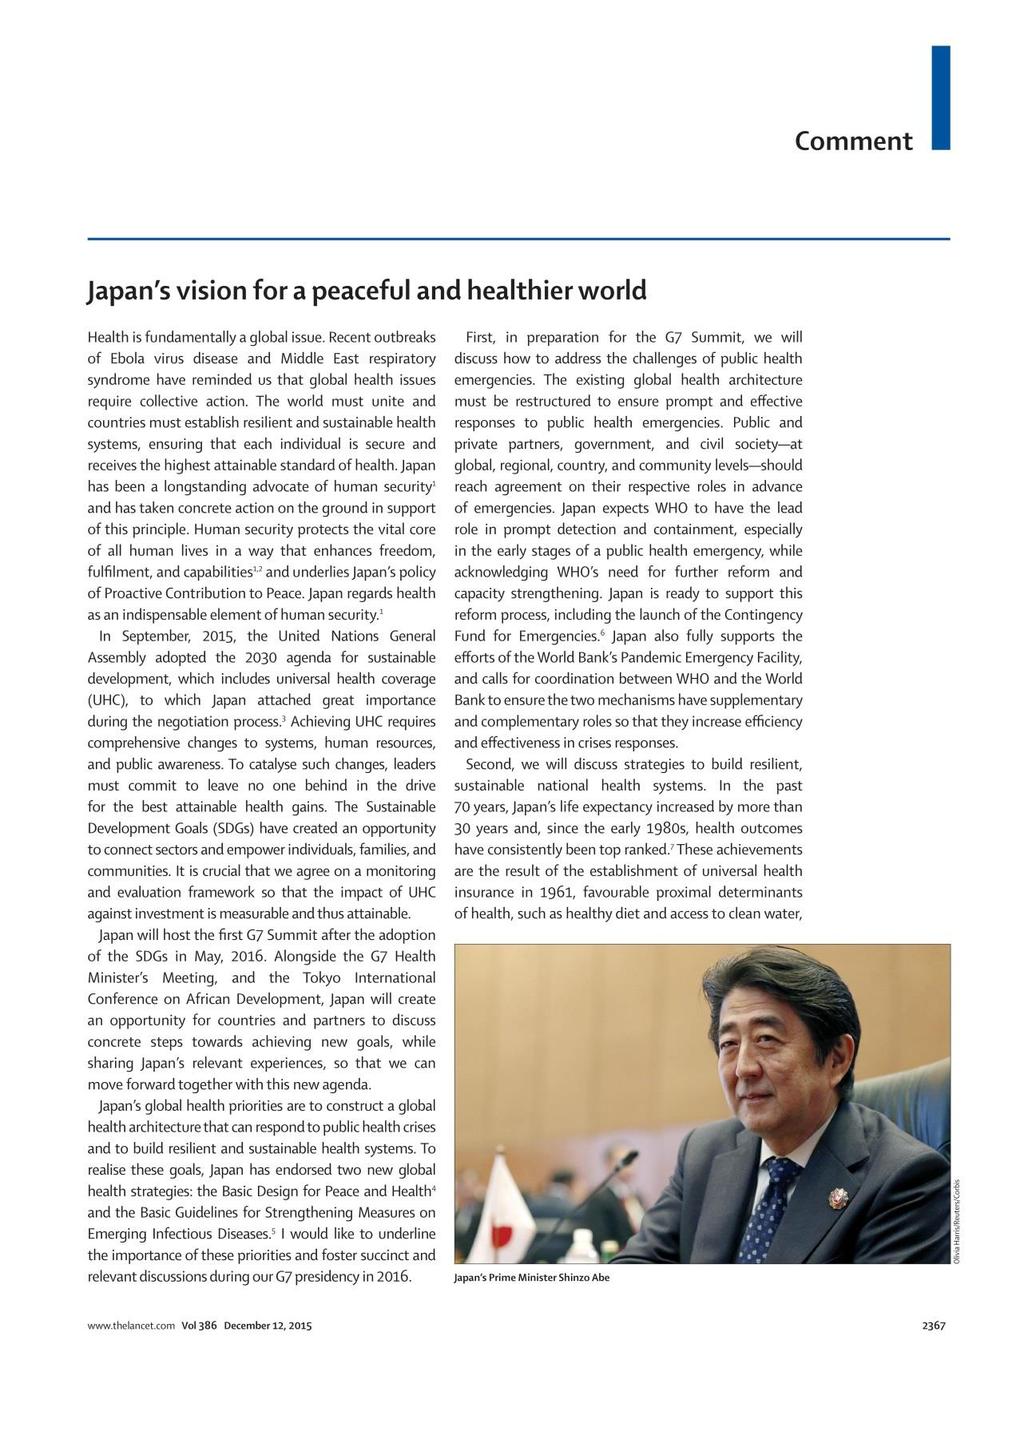 Japan's Role as the host of G7 summit The Lancet Japan s Prime Minister Shinzo Abe on Japan